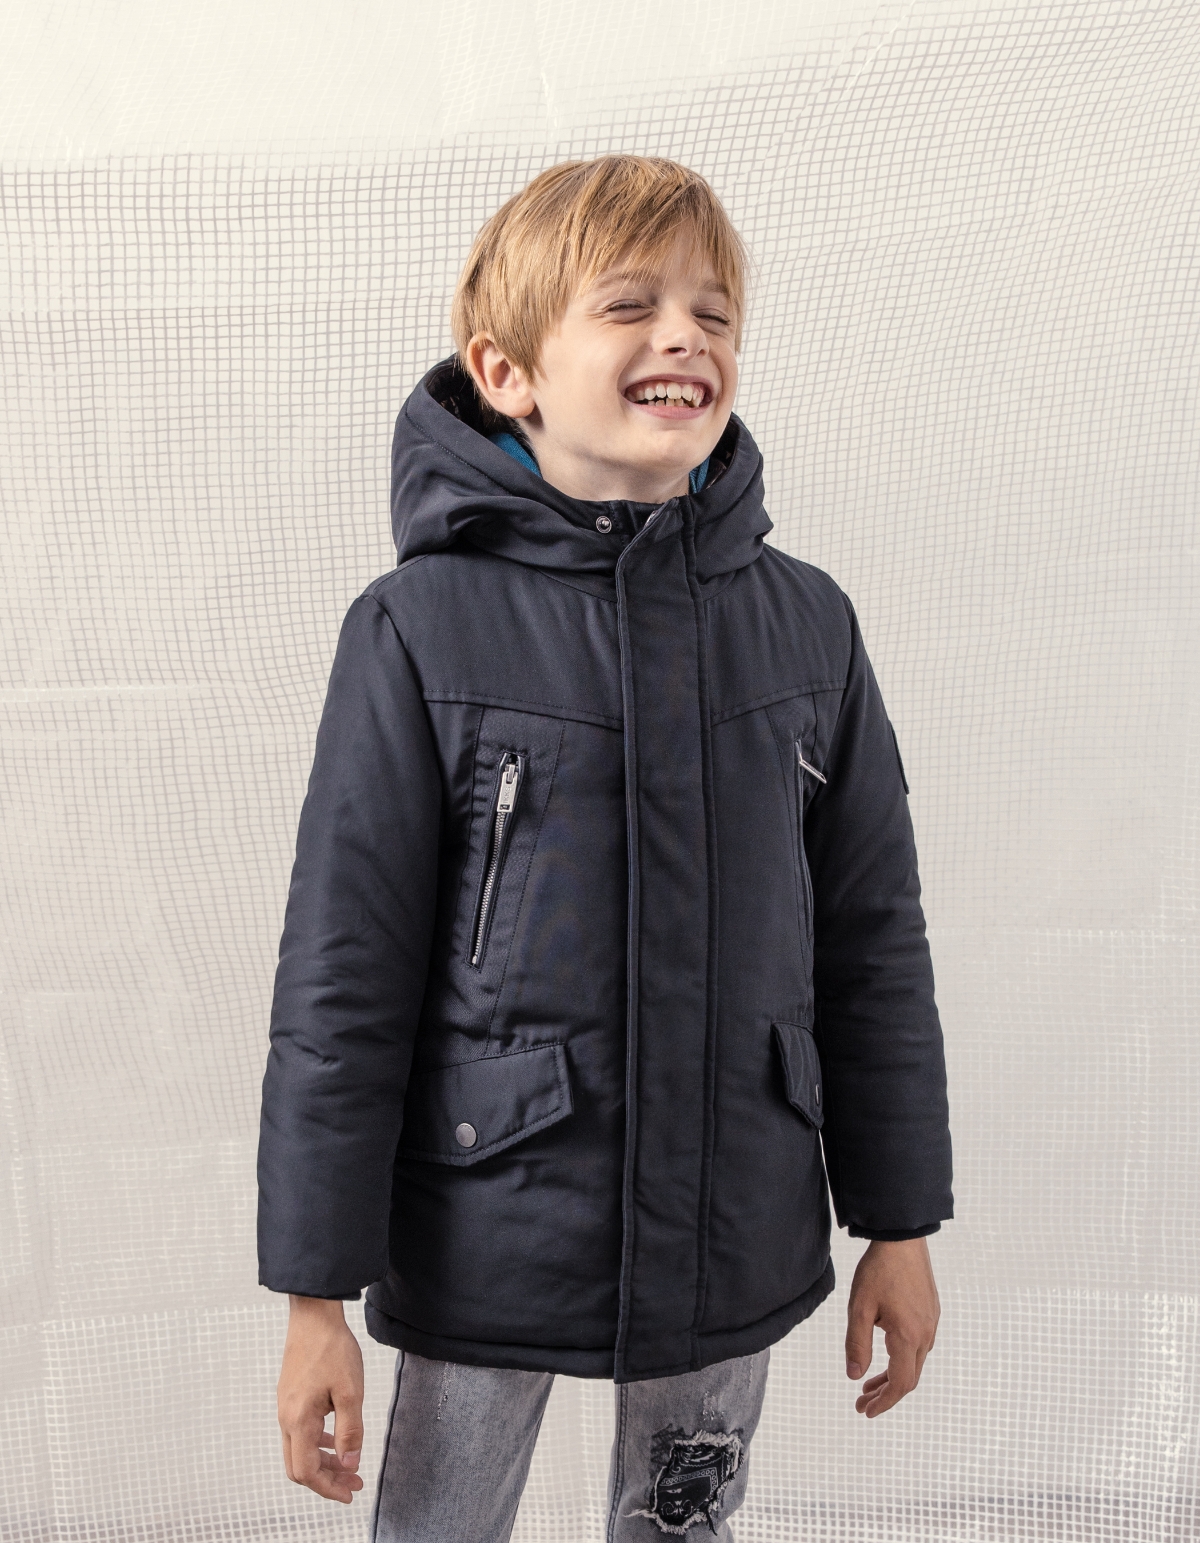 Boys’ 2-in-1 black parka with bronze padded jacket